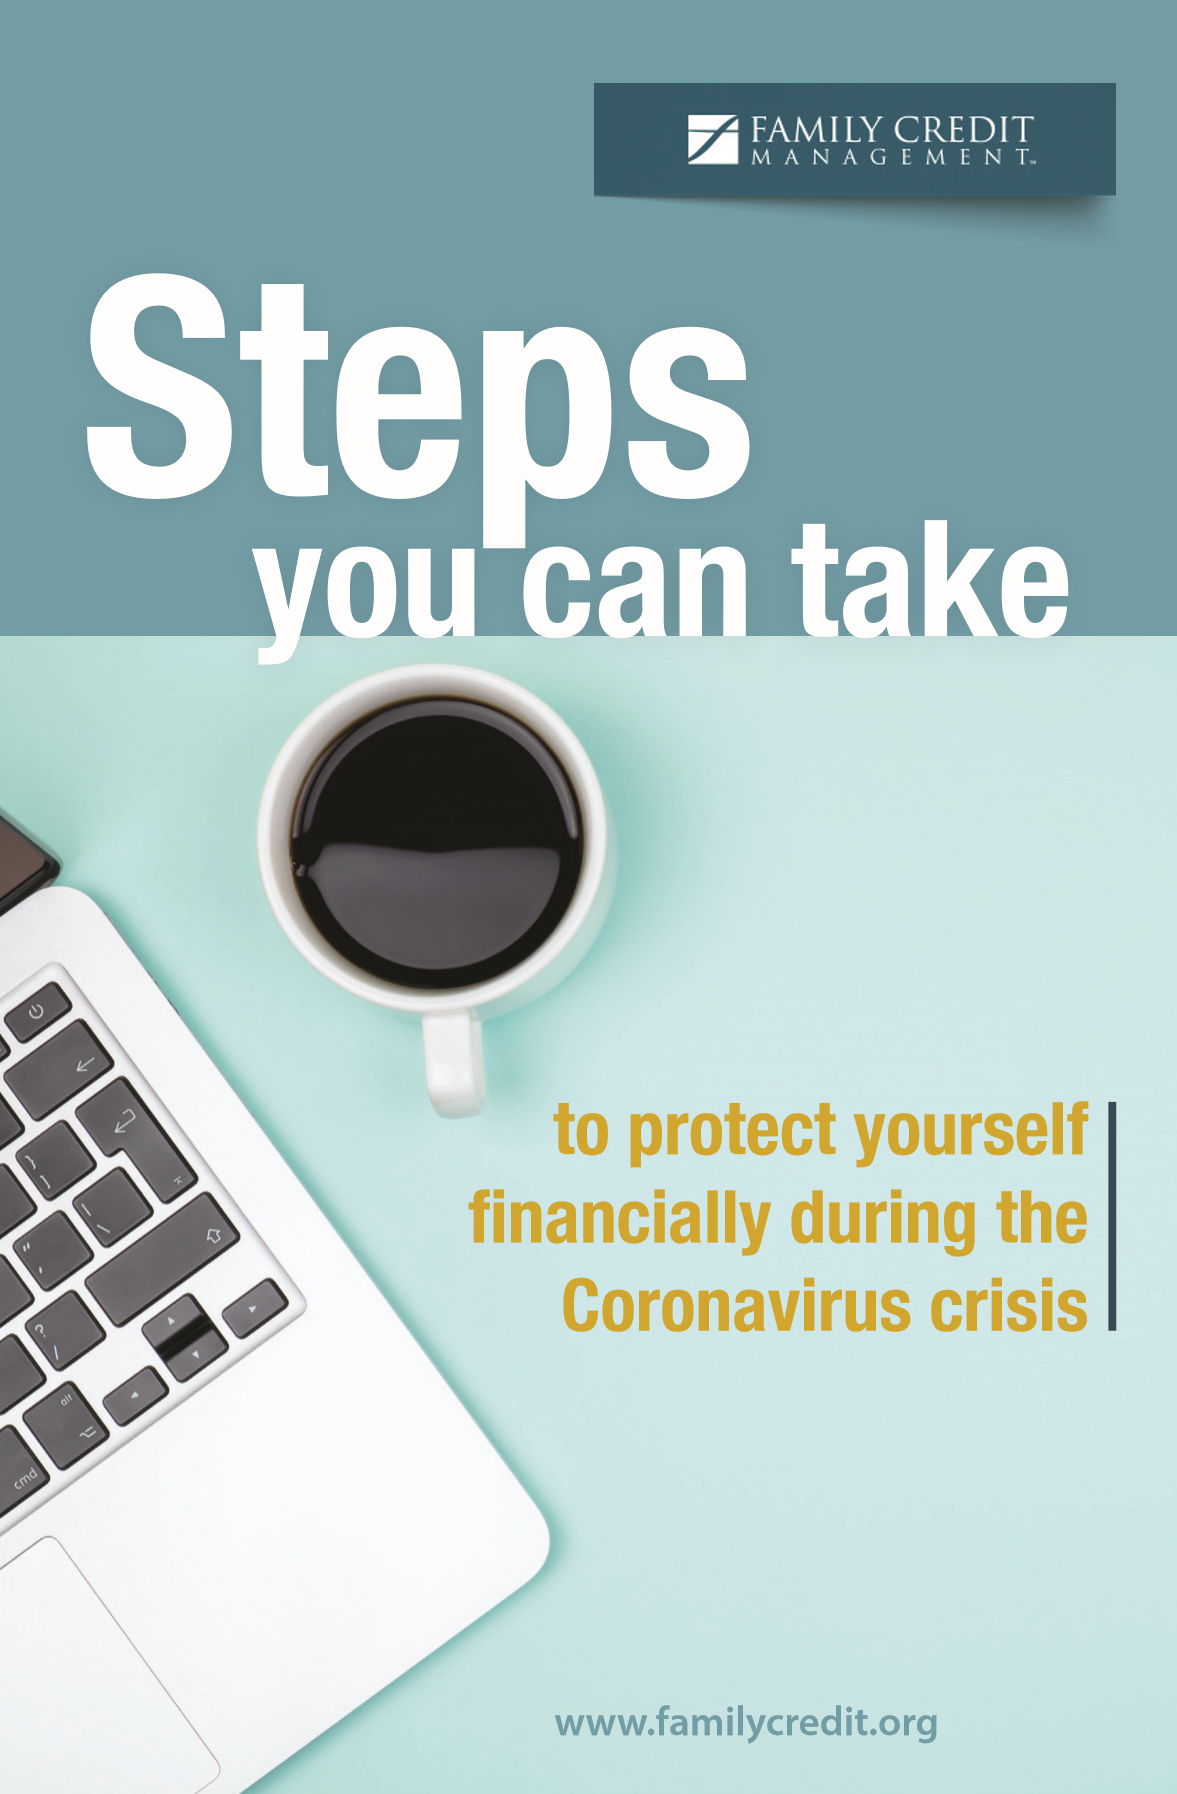 Steps You Can Take to Protect Yourself Financially During the Coronavirus Crisis